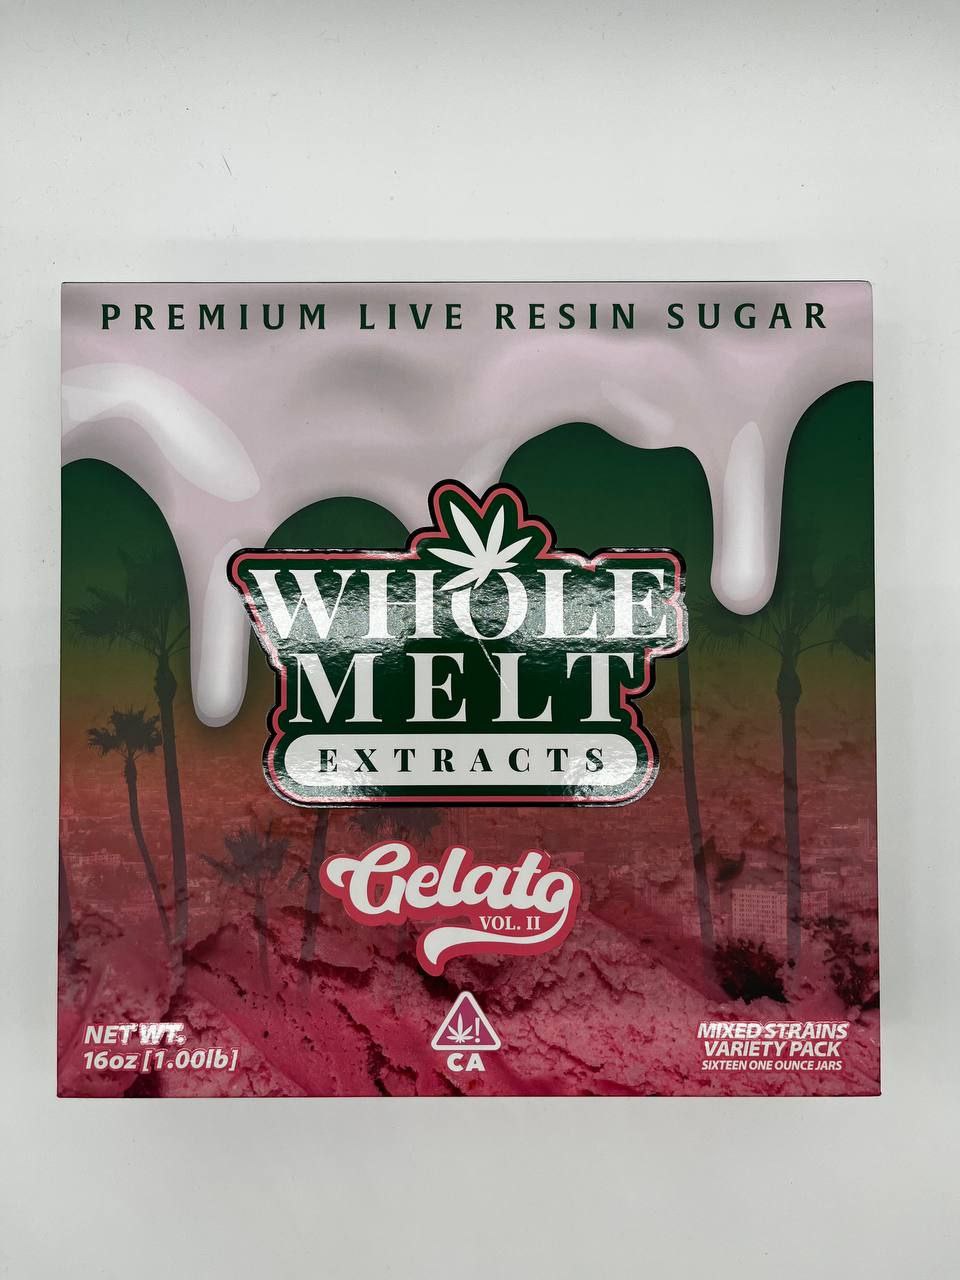 Image of a product box for "Import placeholder for 51." The packaging features a melting ice cream design at the top and palm trees in the background. The box details include weight (16 oz/1.00 lb) and Mixed Strains Variety Pack.